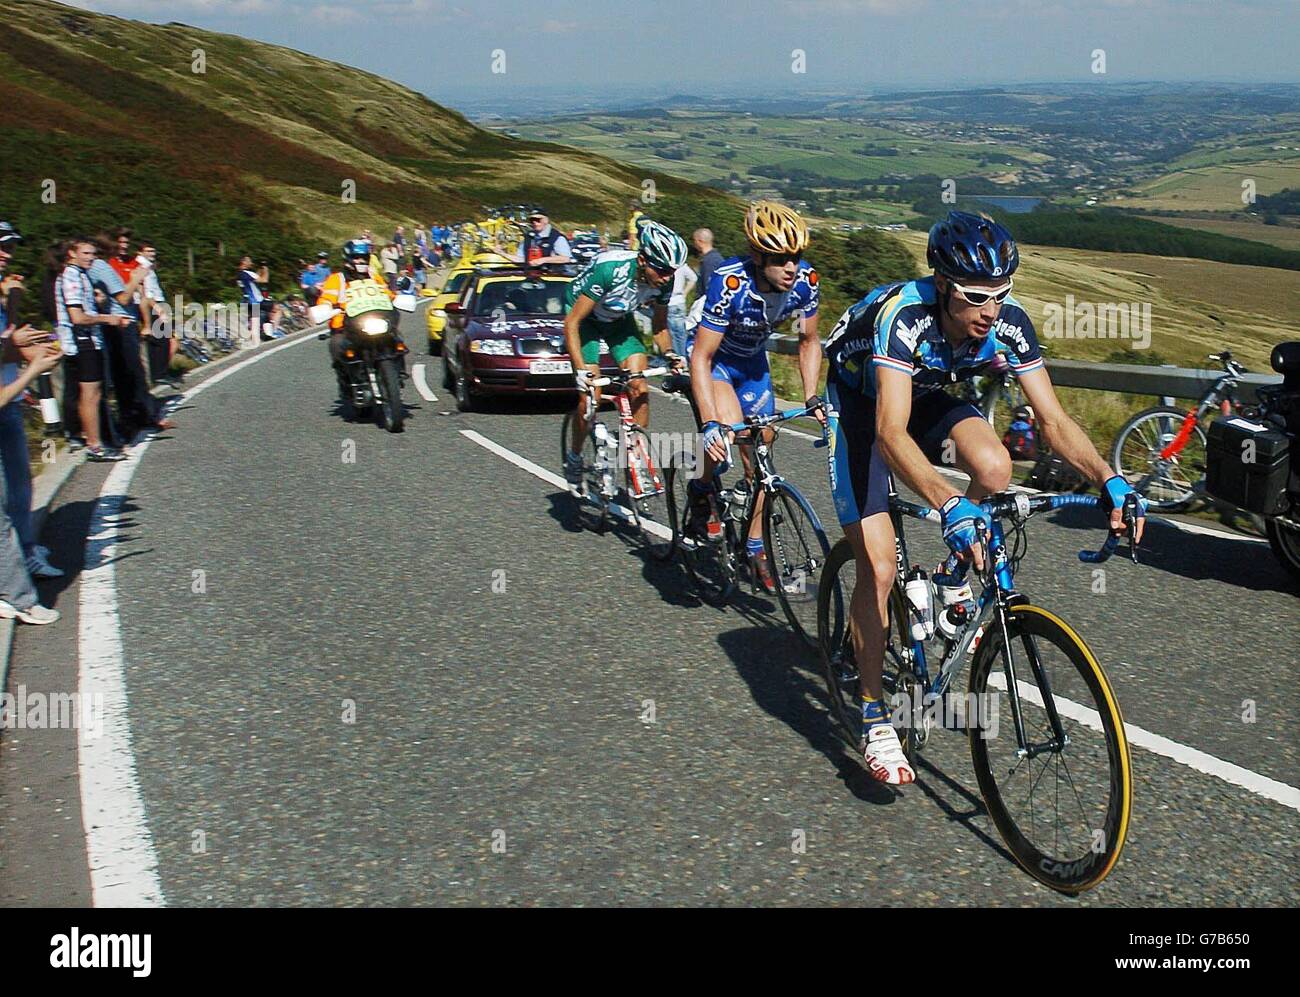 Taking the lead in the Tour of Britain Cycle race a three man break away led by Chris Baldwin of the USA ahead of Ben Day of Australia, climb Holme Moss, near Holmfirth in the Peak District well ahead of the main bunch. Stock Photo